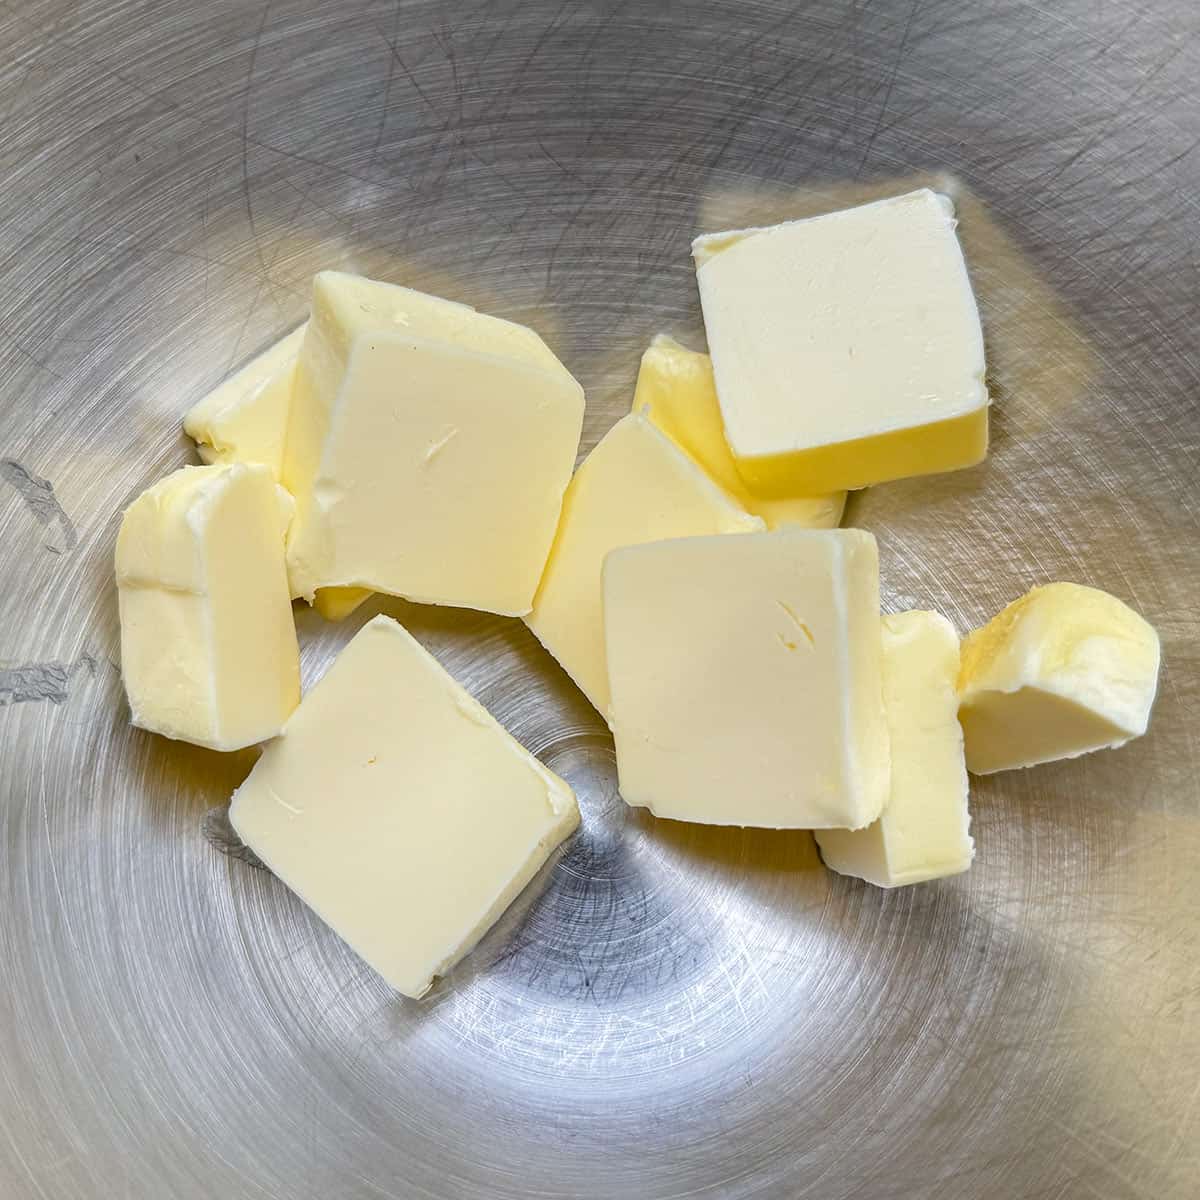 Soft cubed butter in a mixer bowl.